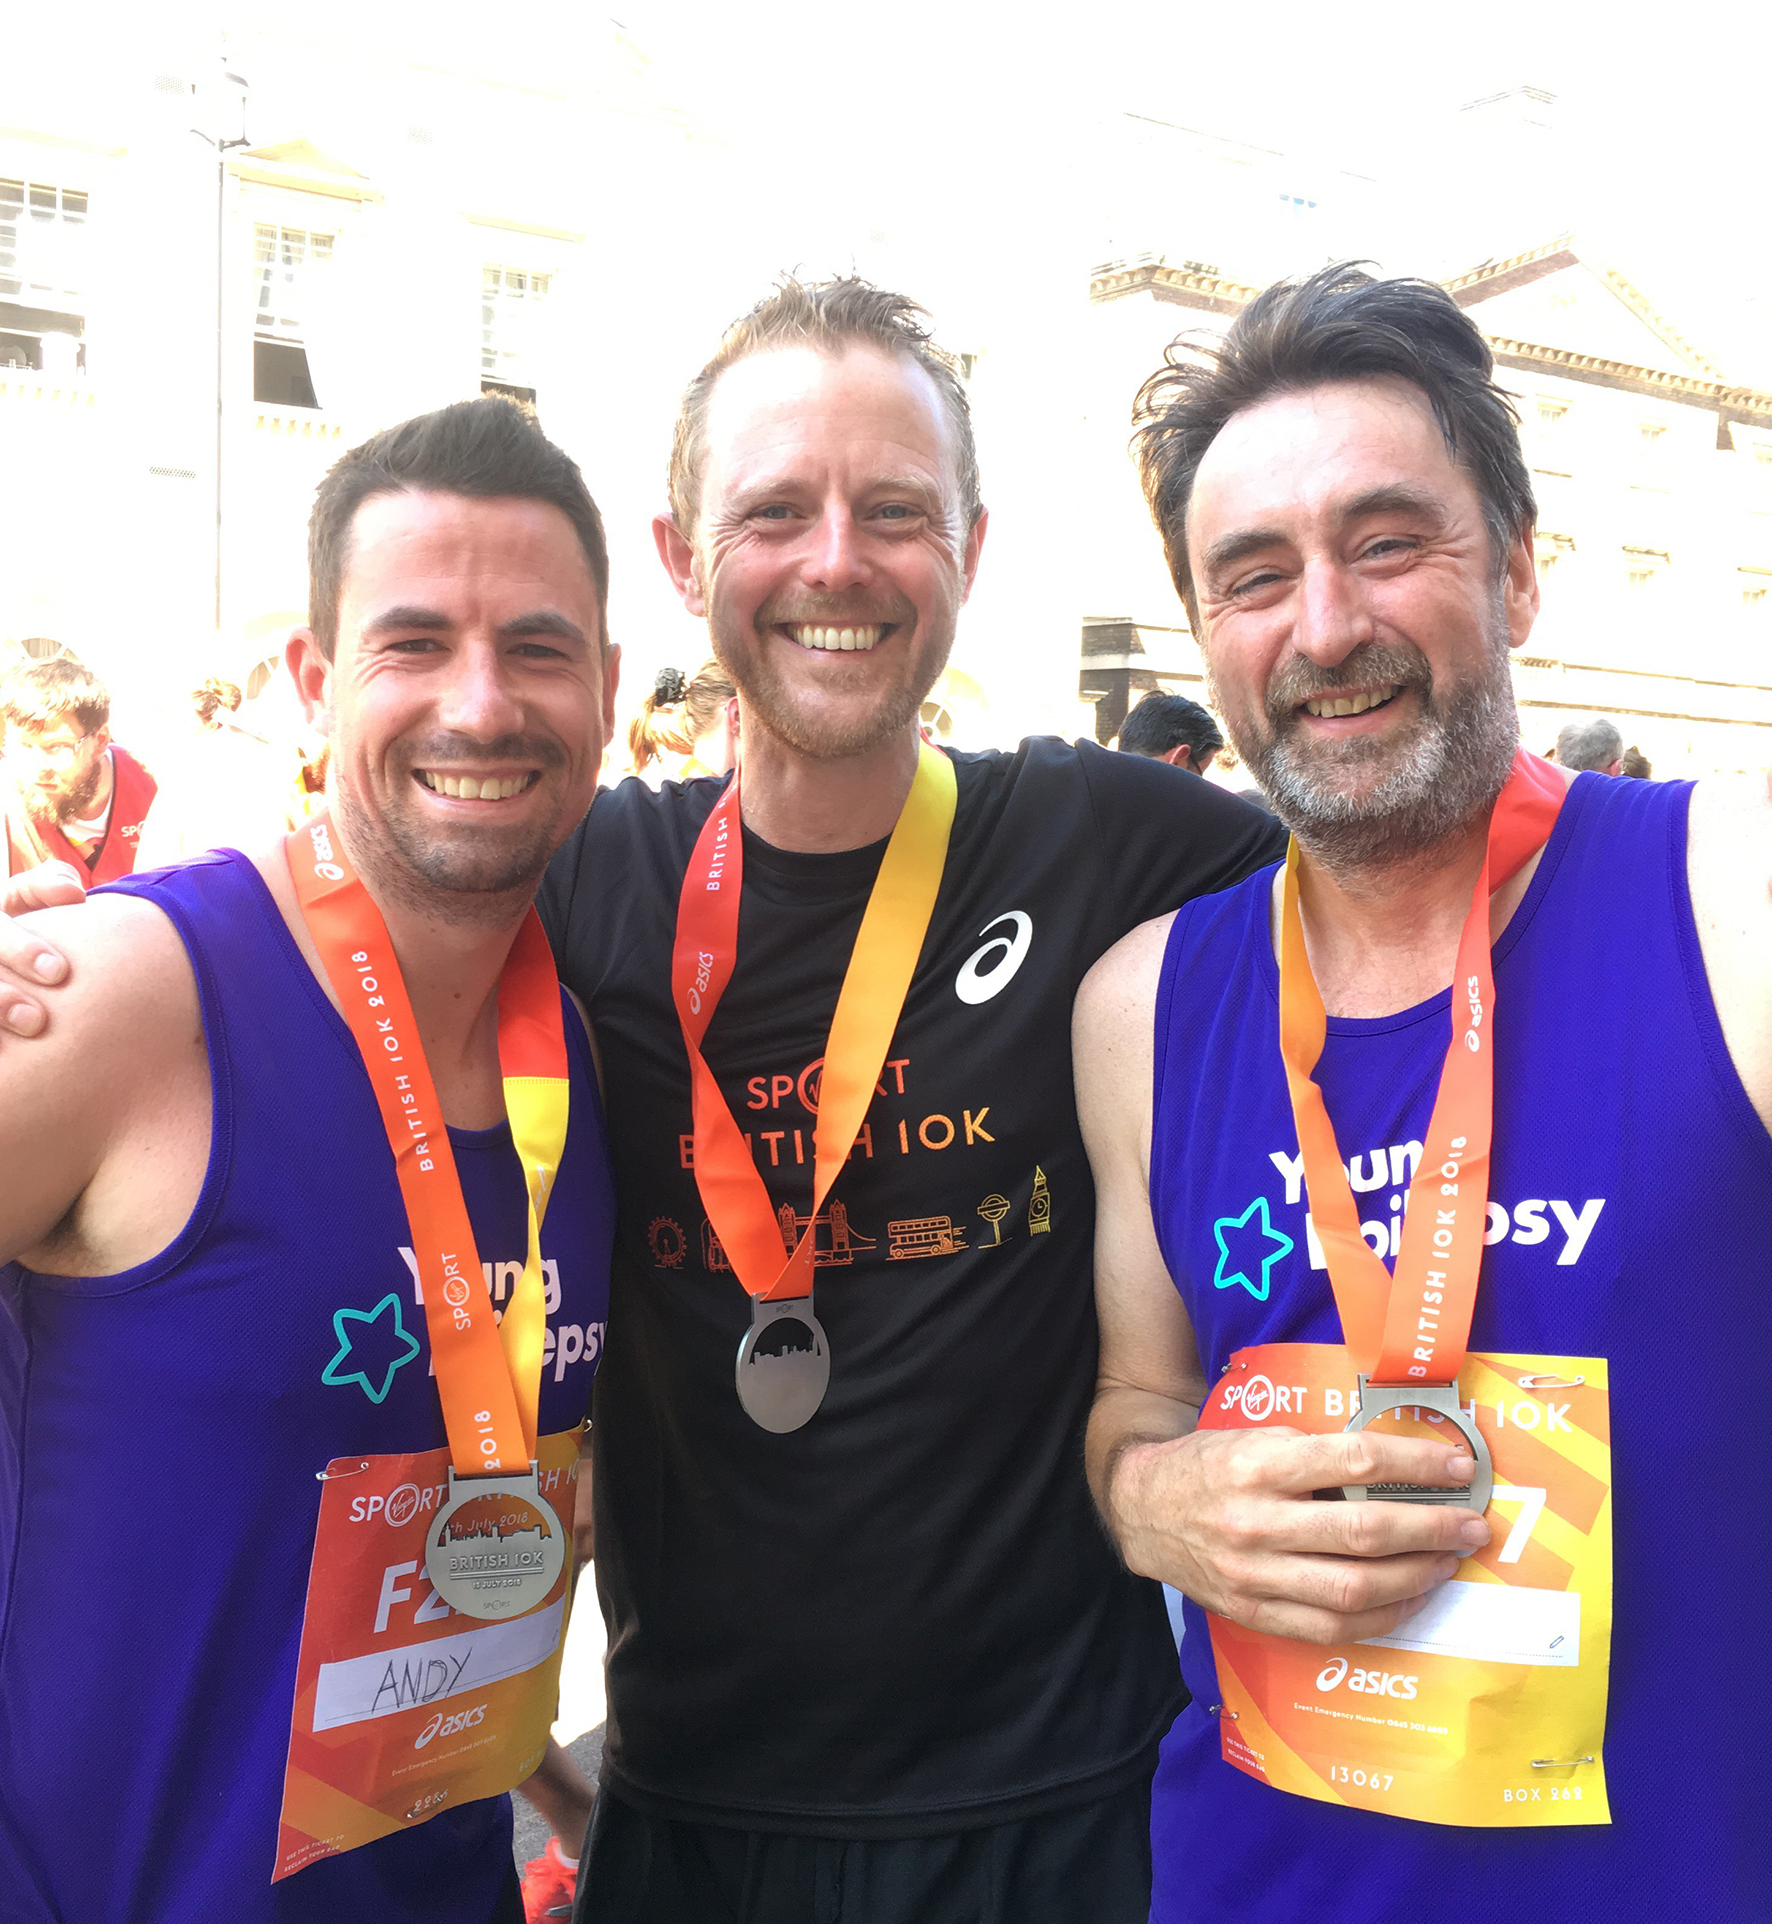 Abacus running team defy British 10k heat to help raise over £6,500 for Young Epilepsy